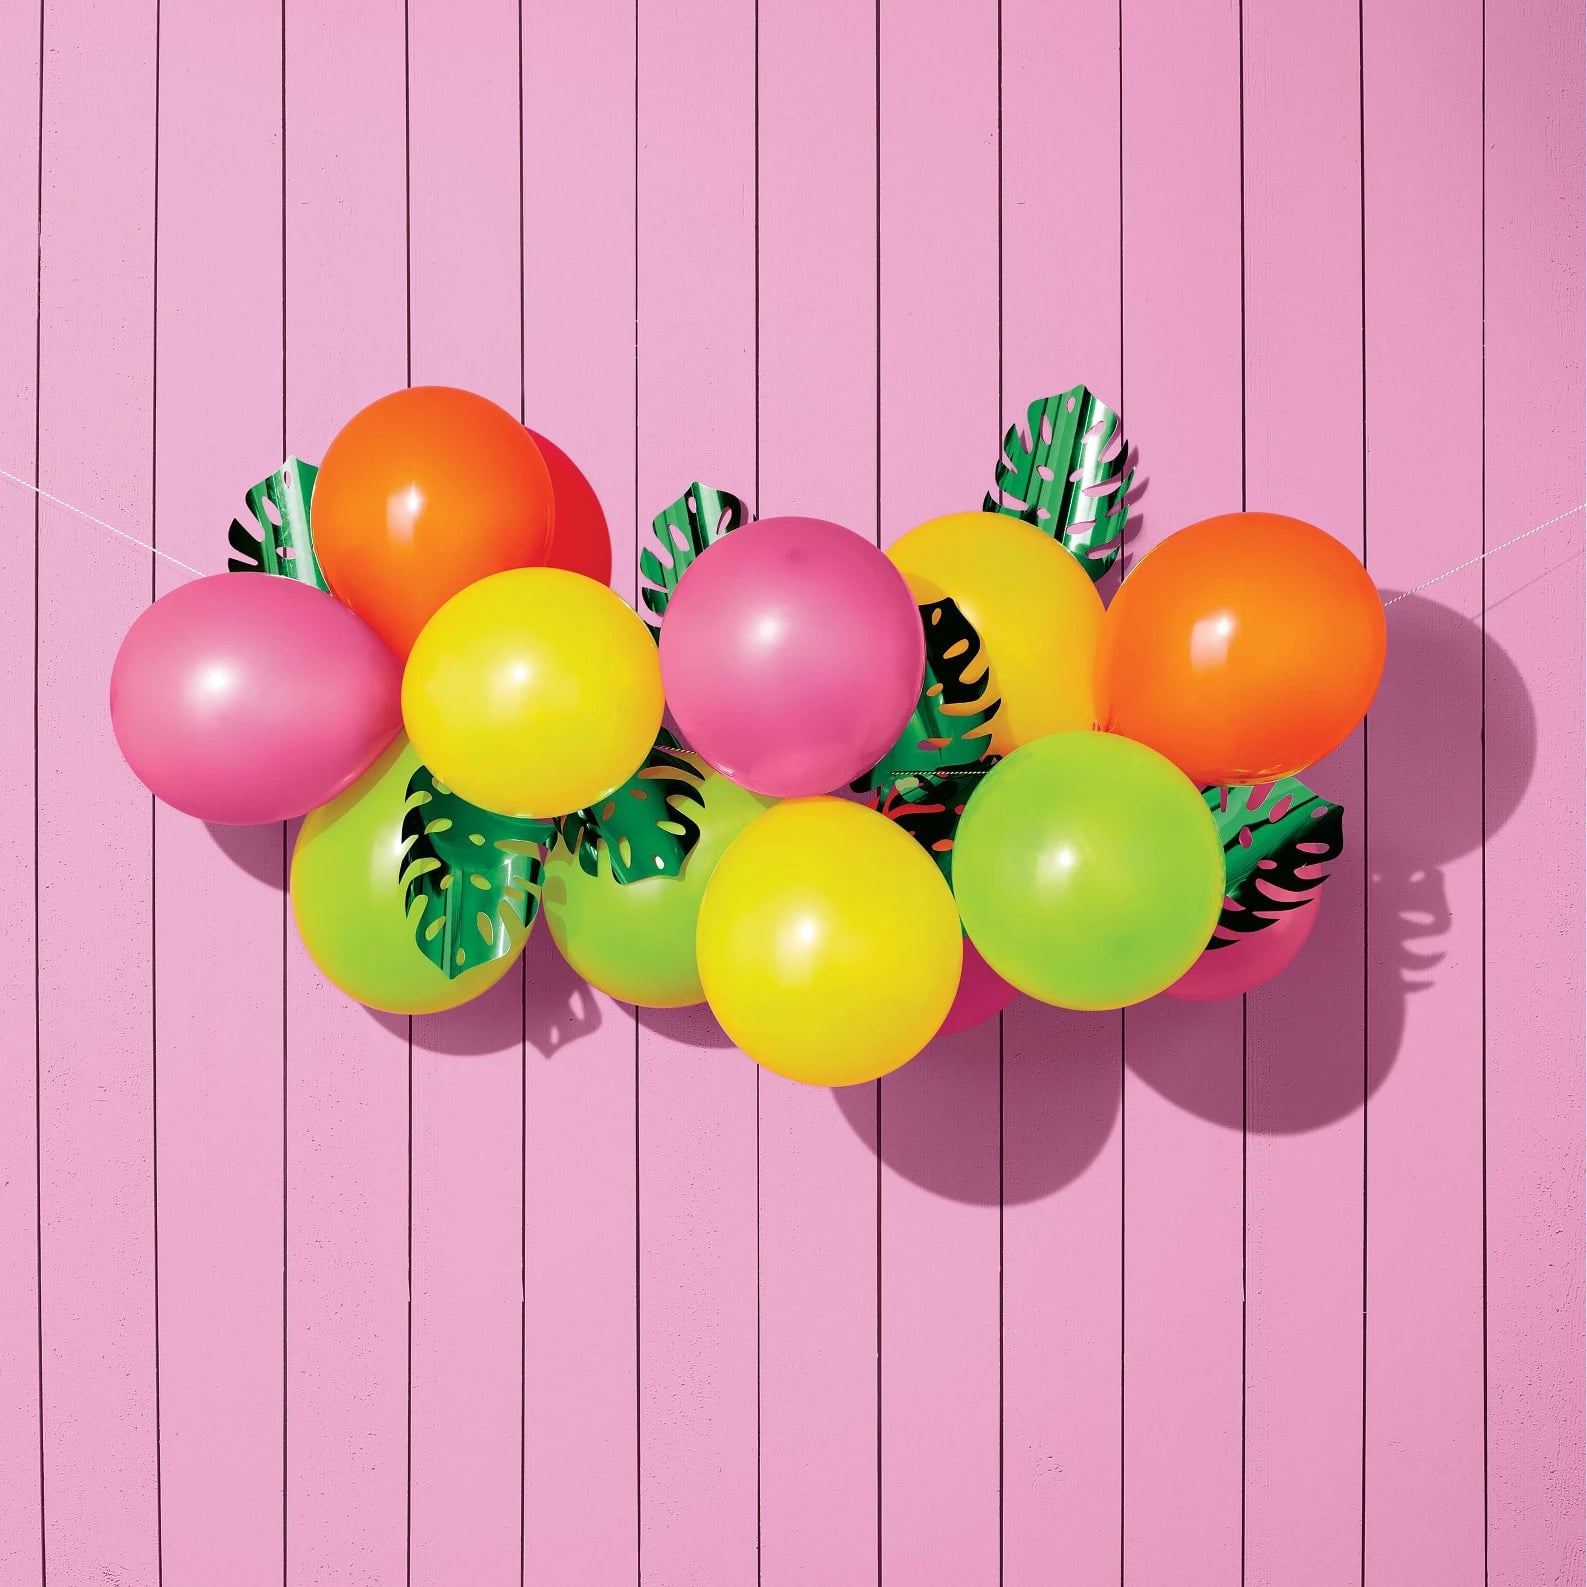 Best Balloon Arches From Target